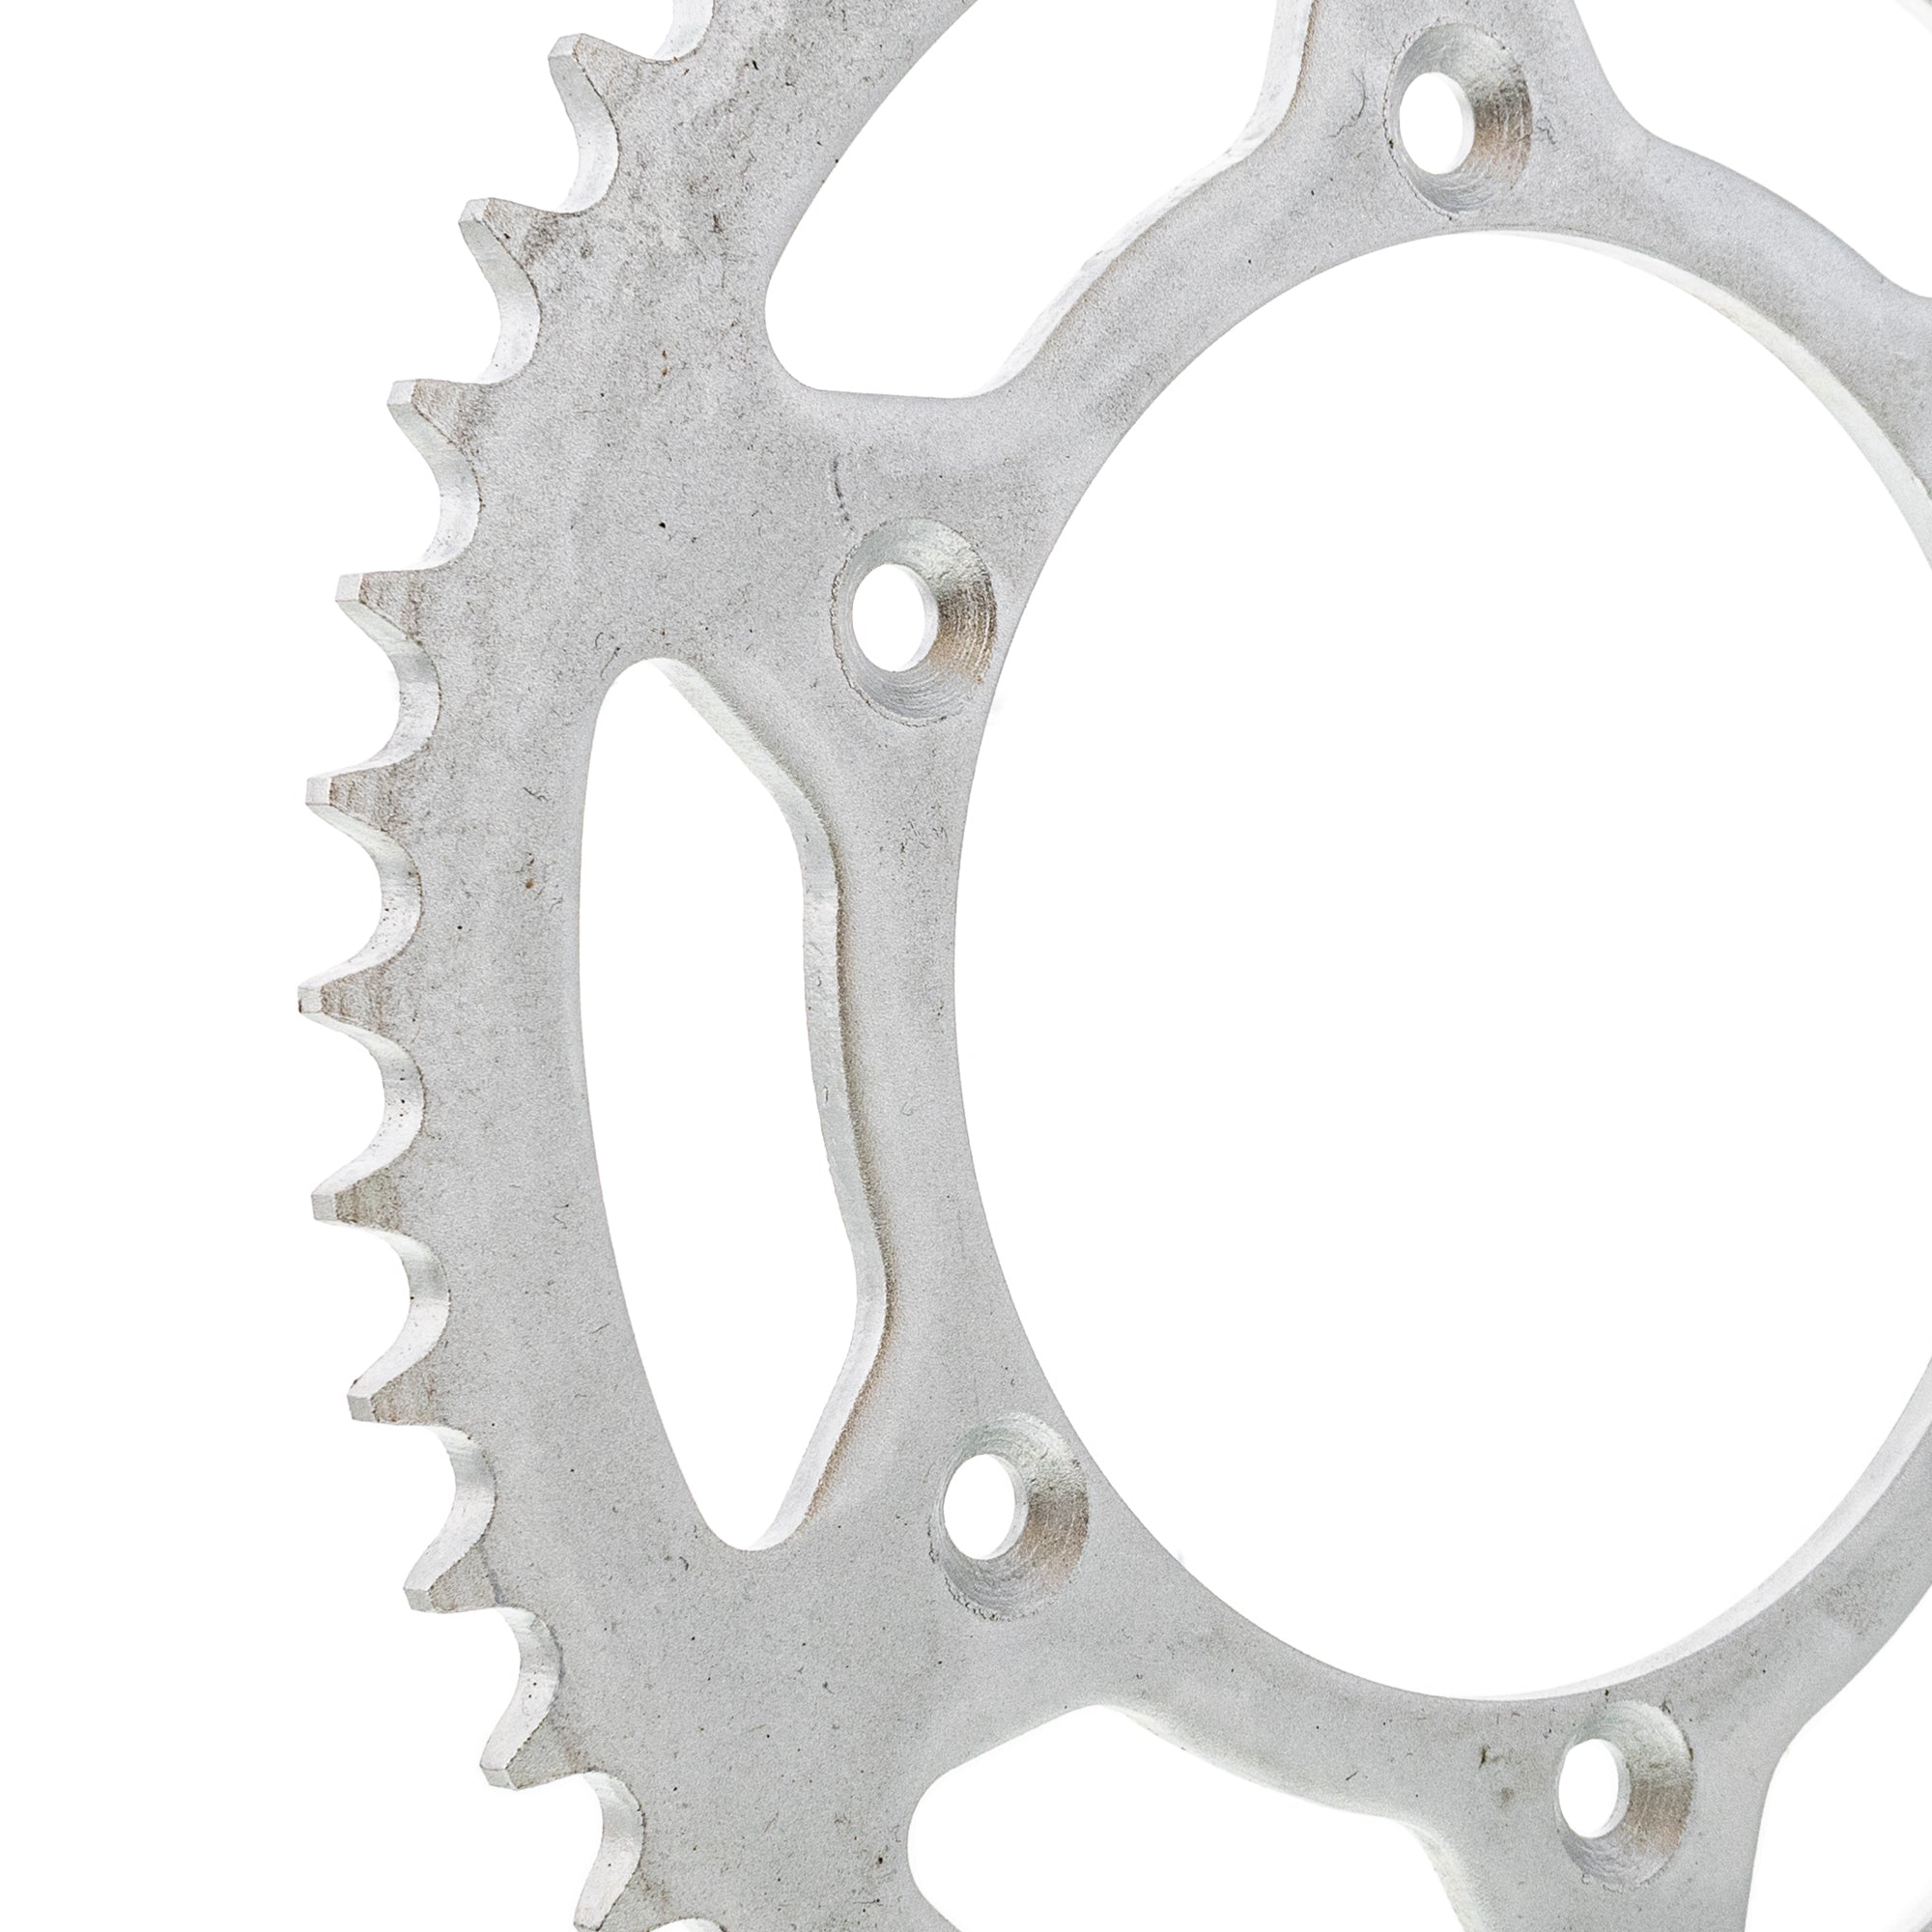 520 Front 13T Rear 49T Drive Sprocket Kit for Yamaha YZ125